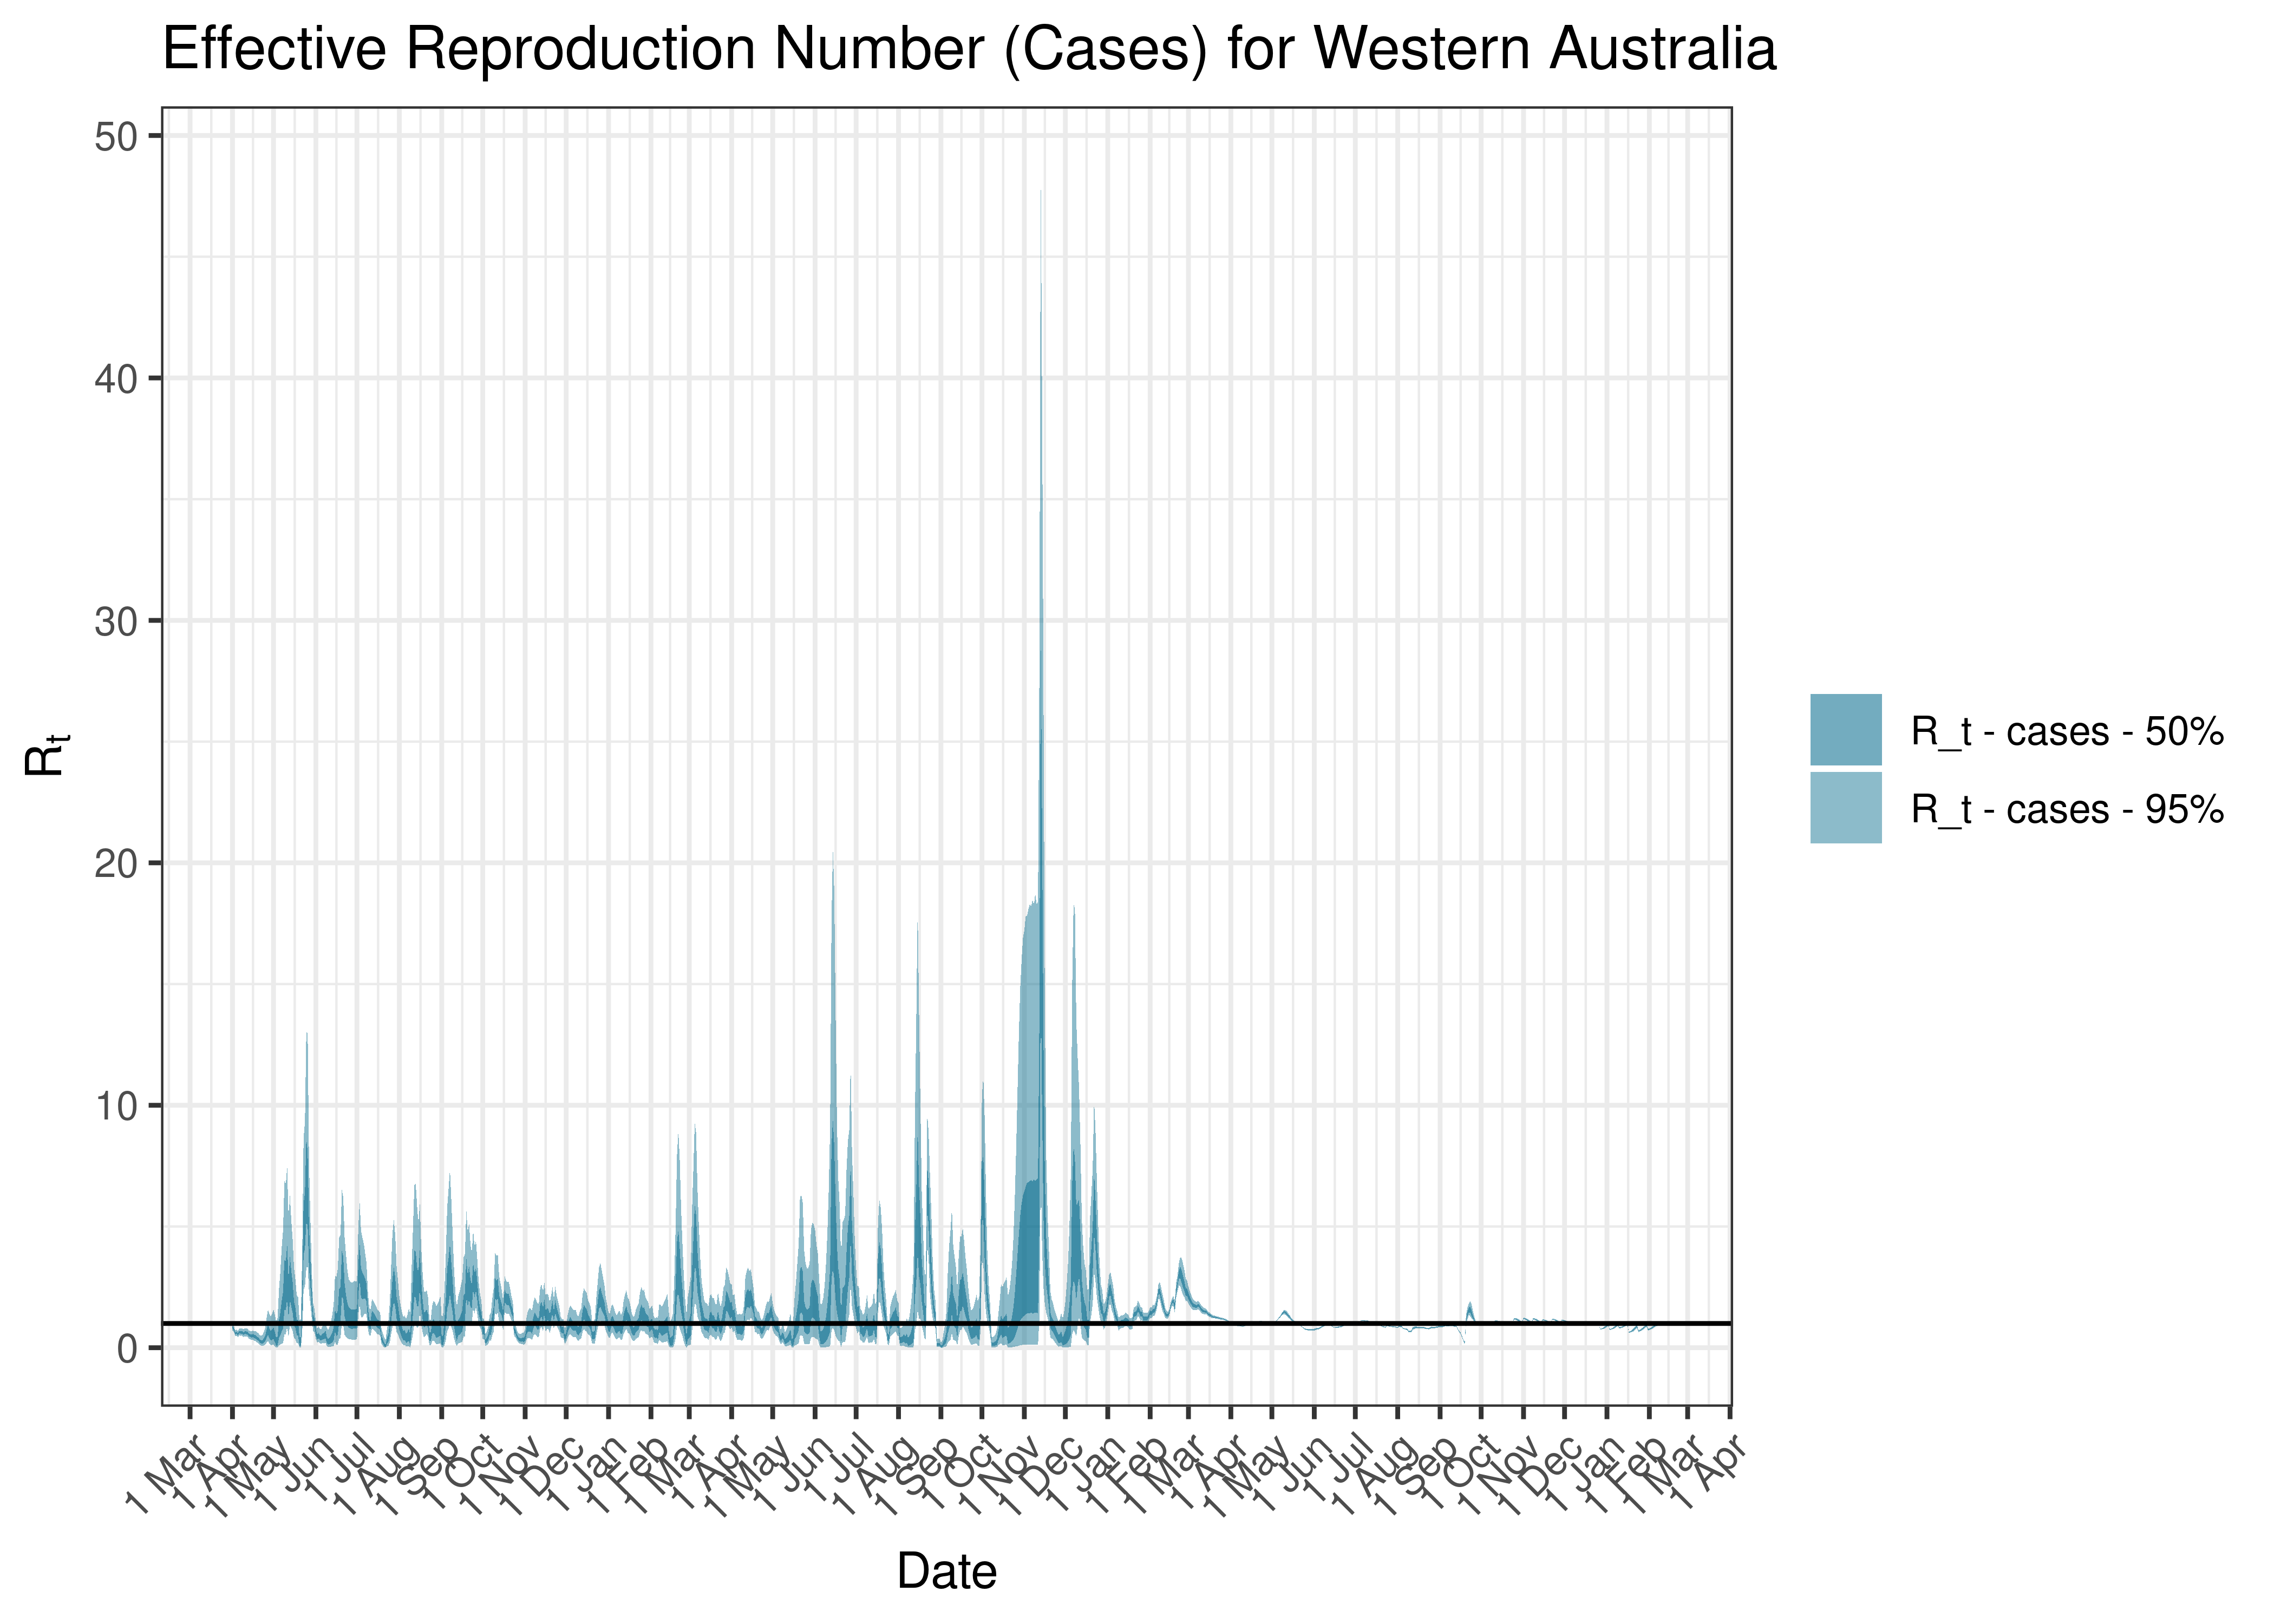 Estimated Effective Reproduction Number Based on Cases for Western Australia since 1 April 2020